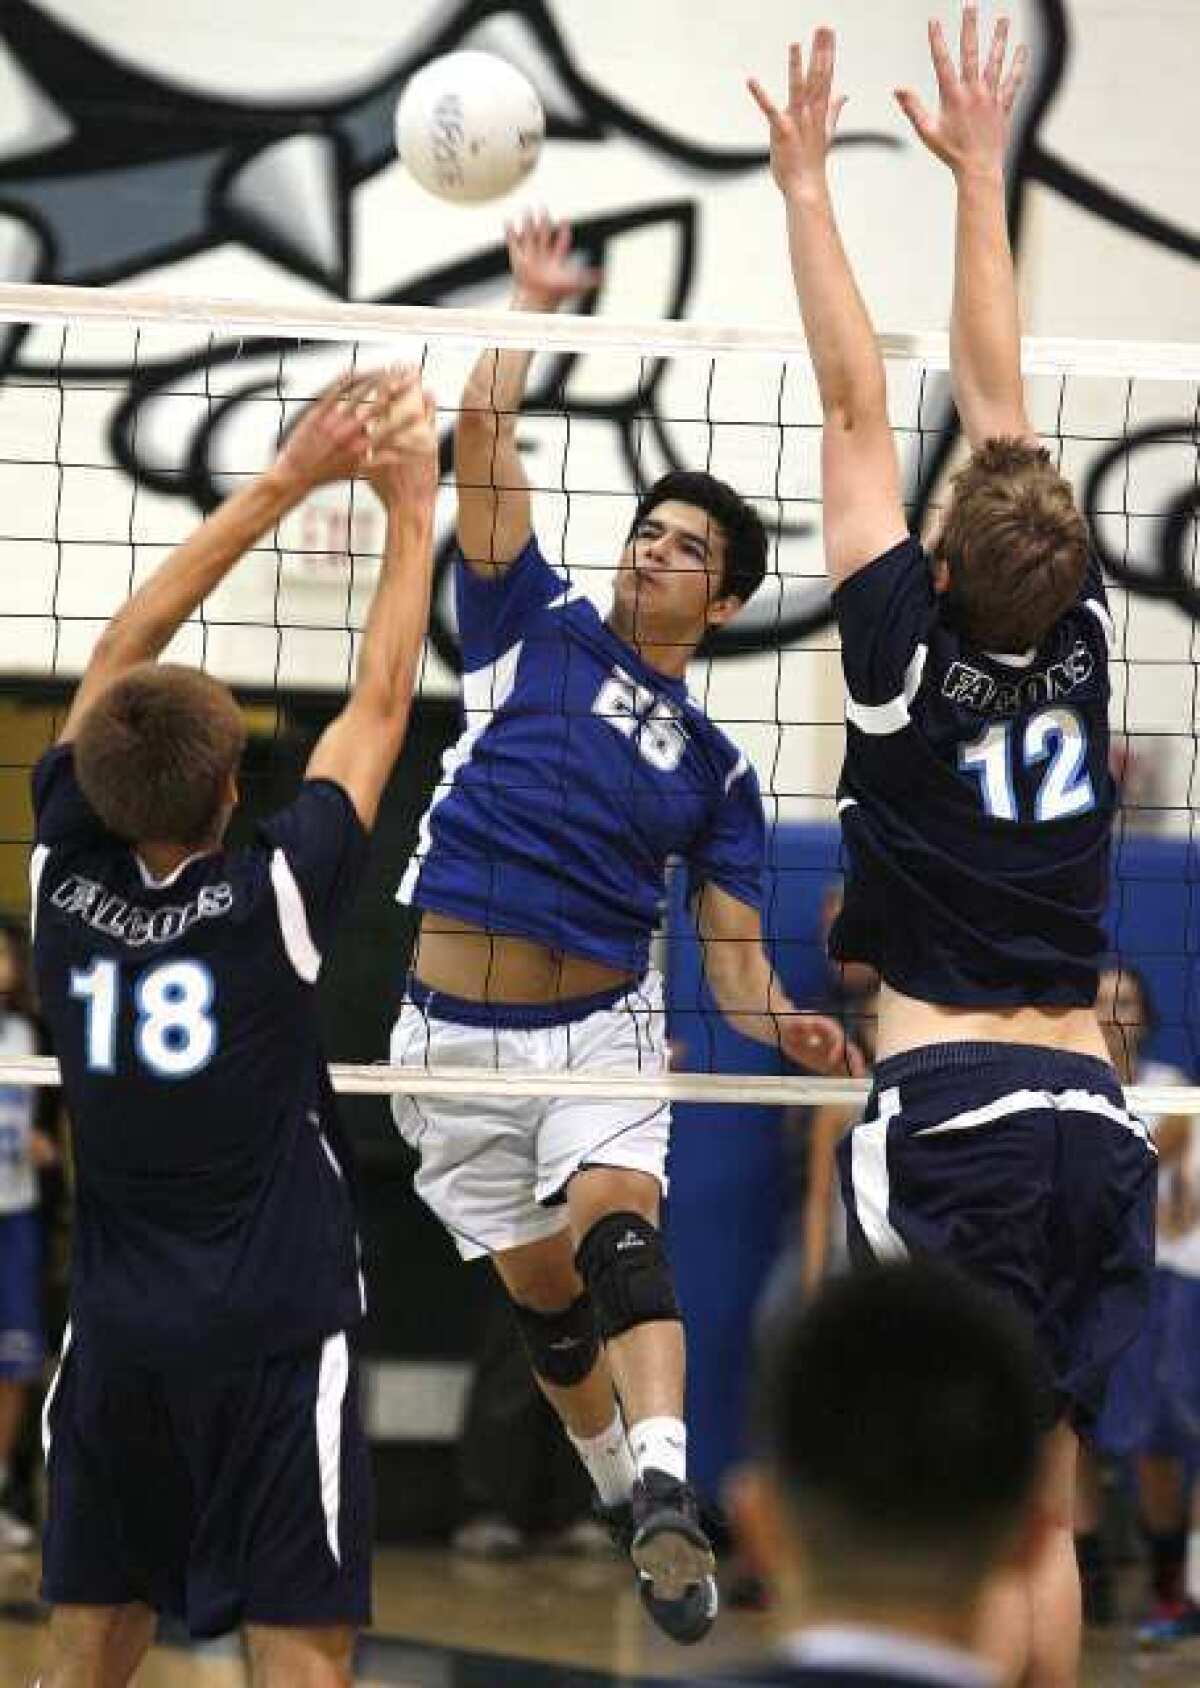 Burbank's Derian Blandon spikes a kill attempt over the defense of Crescenta Valley's Freedom Tripp and Zachary Burch in a Pacific League boys volleyball match.